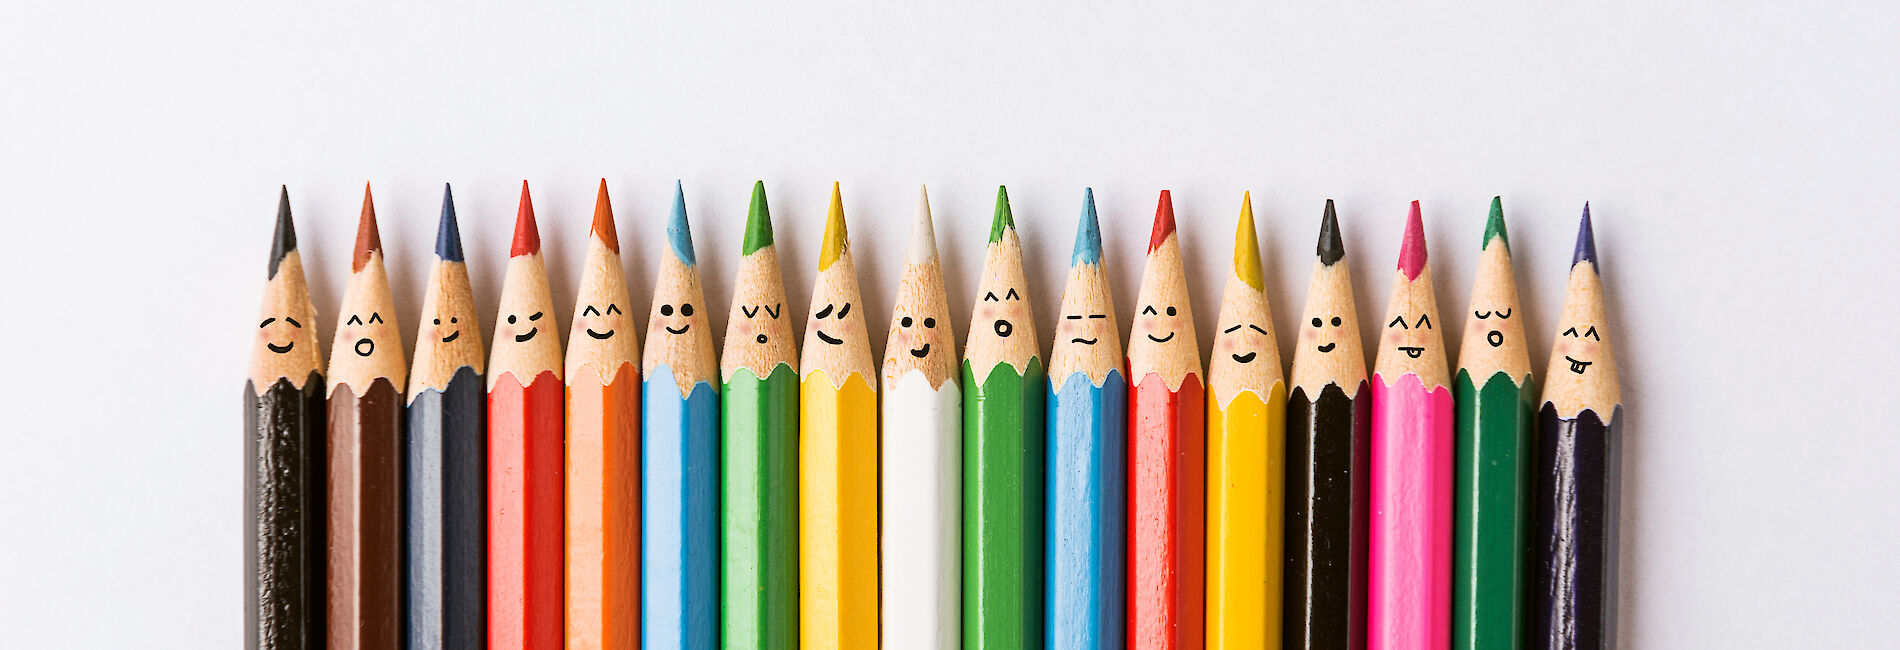 Colorful pencils with faces